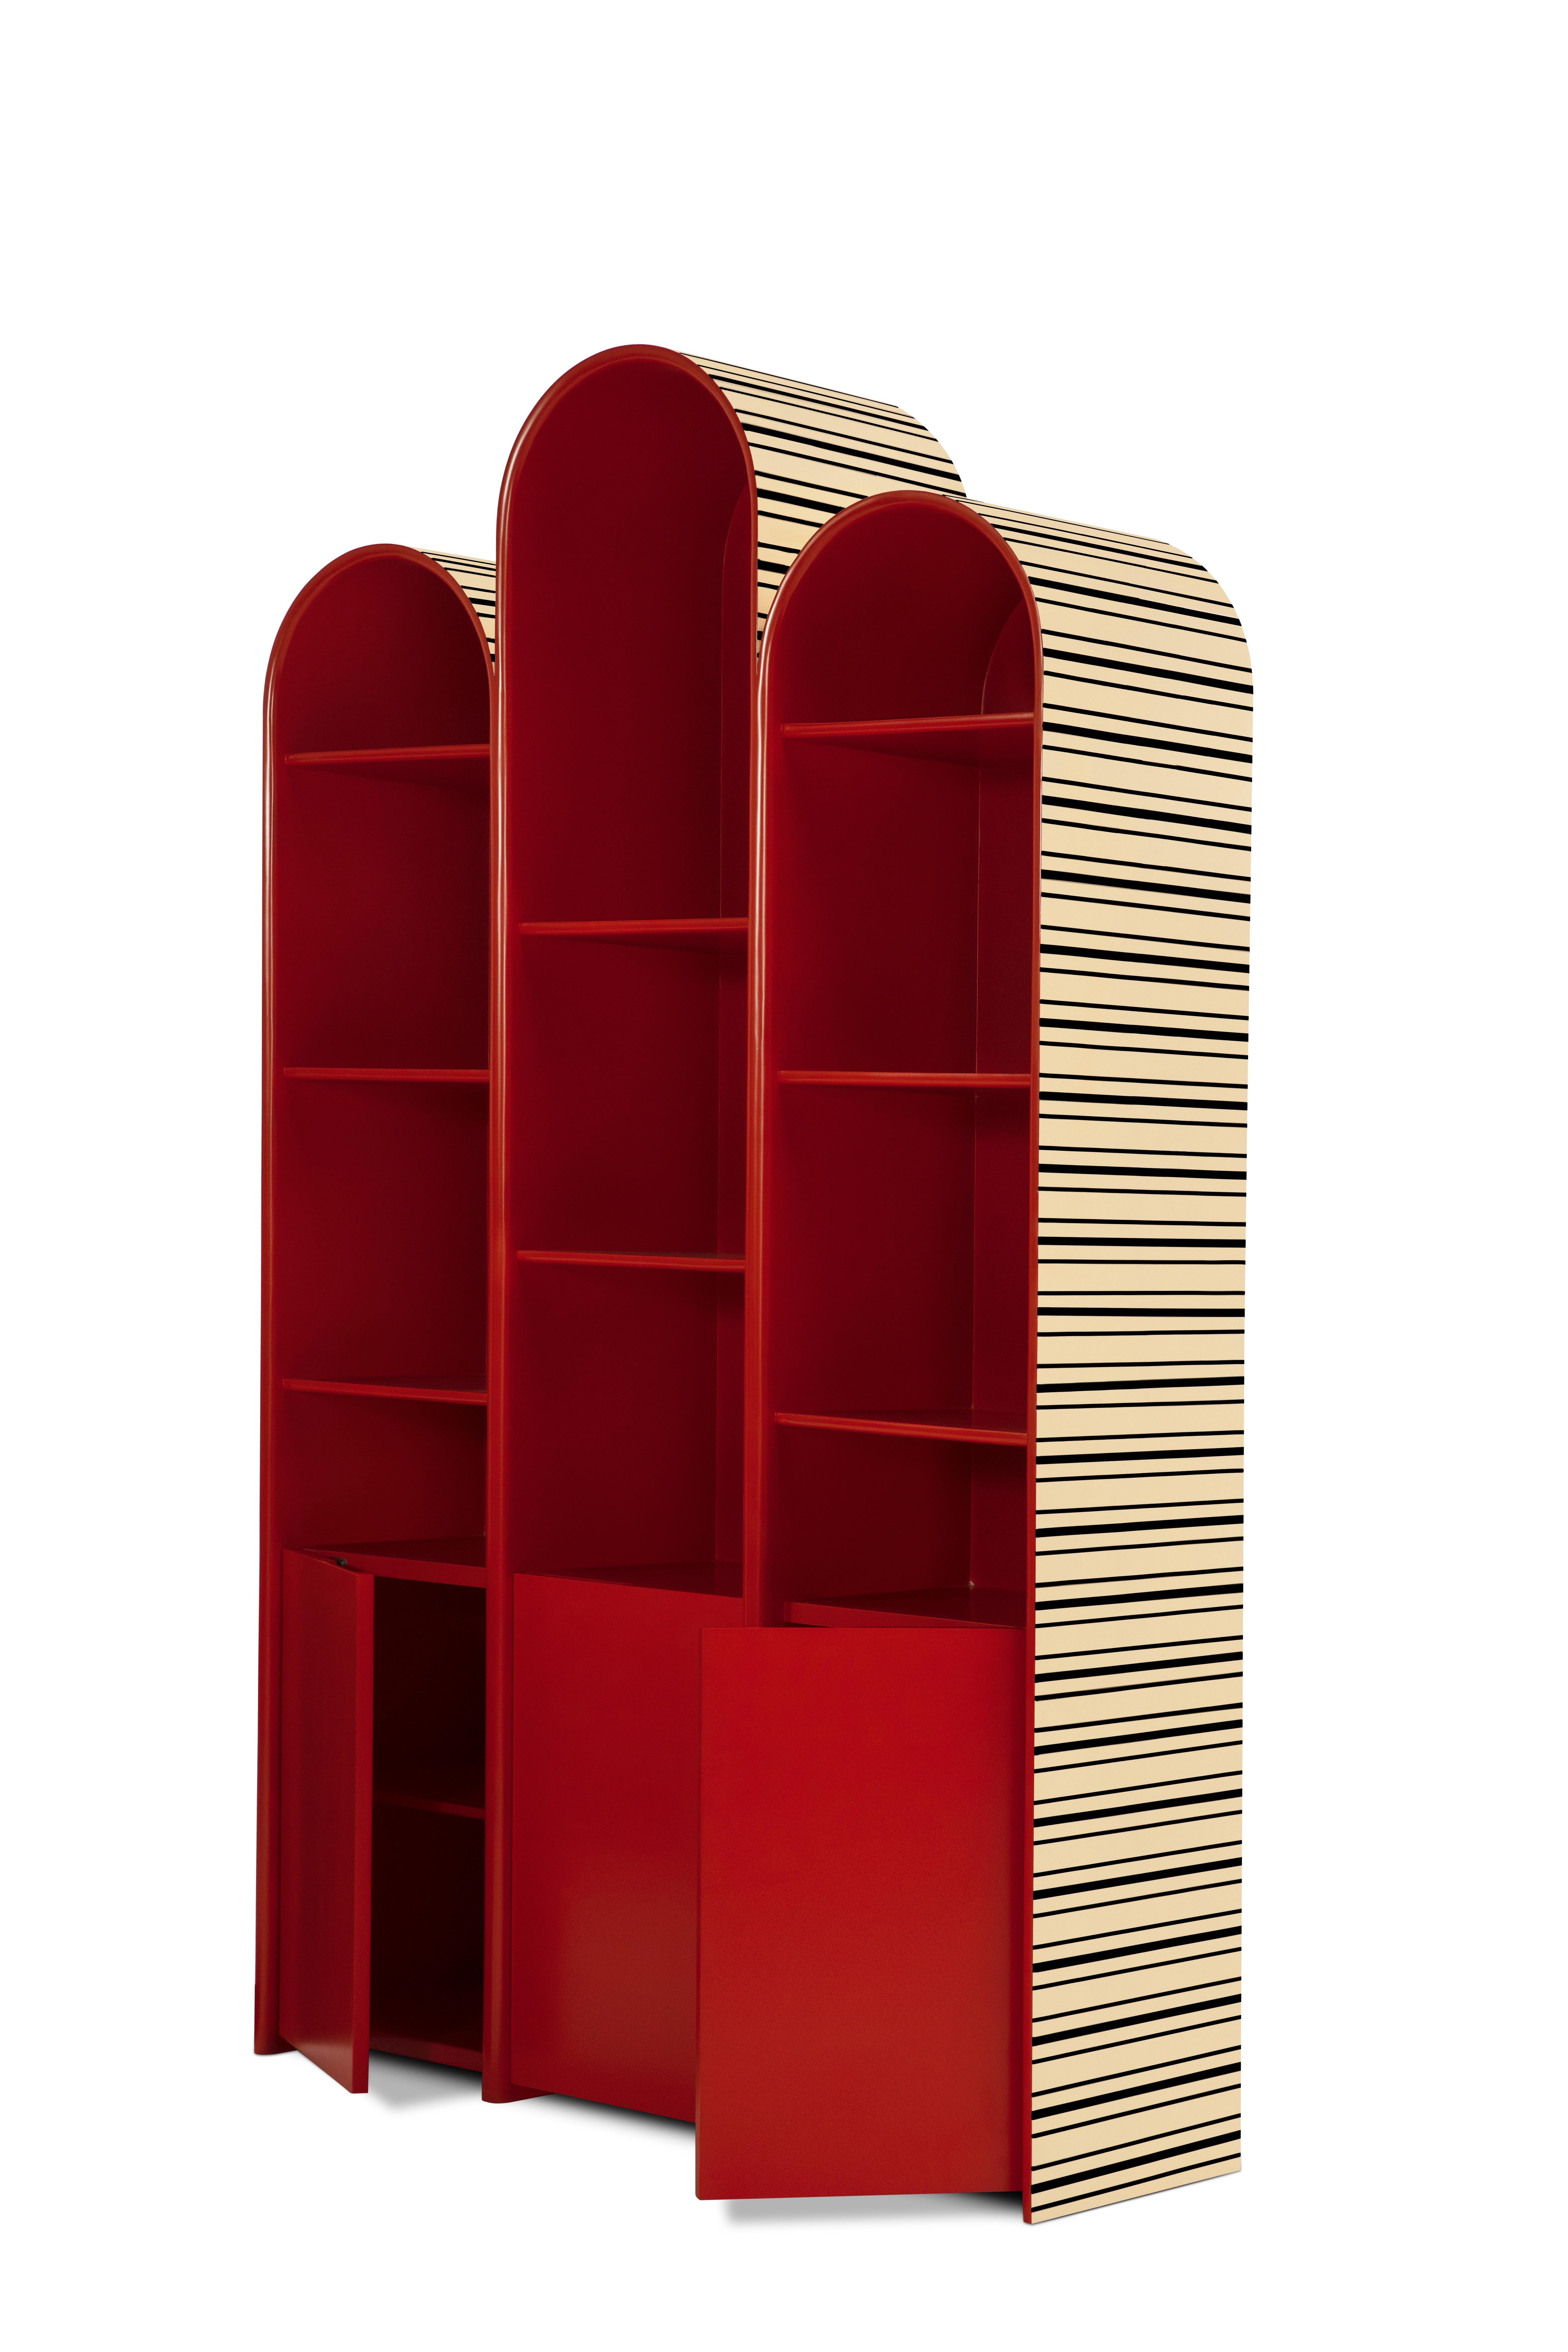 Indian Playhouse Modular Showcase Cabinet by Matteo Cibic For Sale